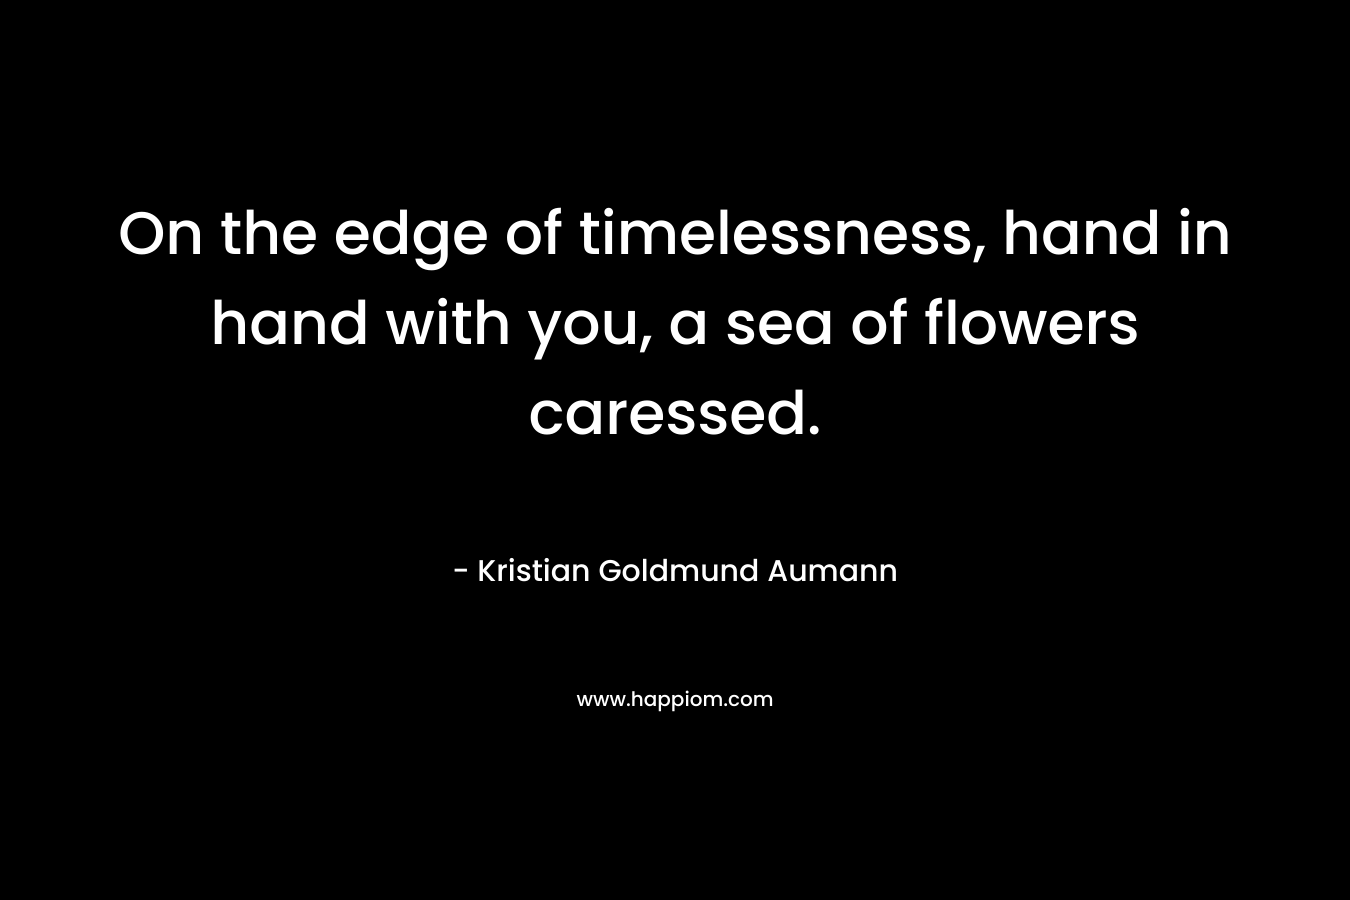 On the edge of timelessness, hand in hand with you, a sea of flowers caressed.